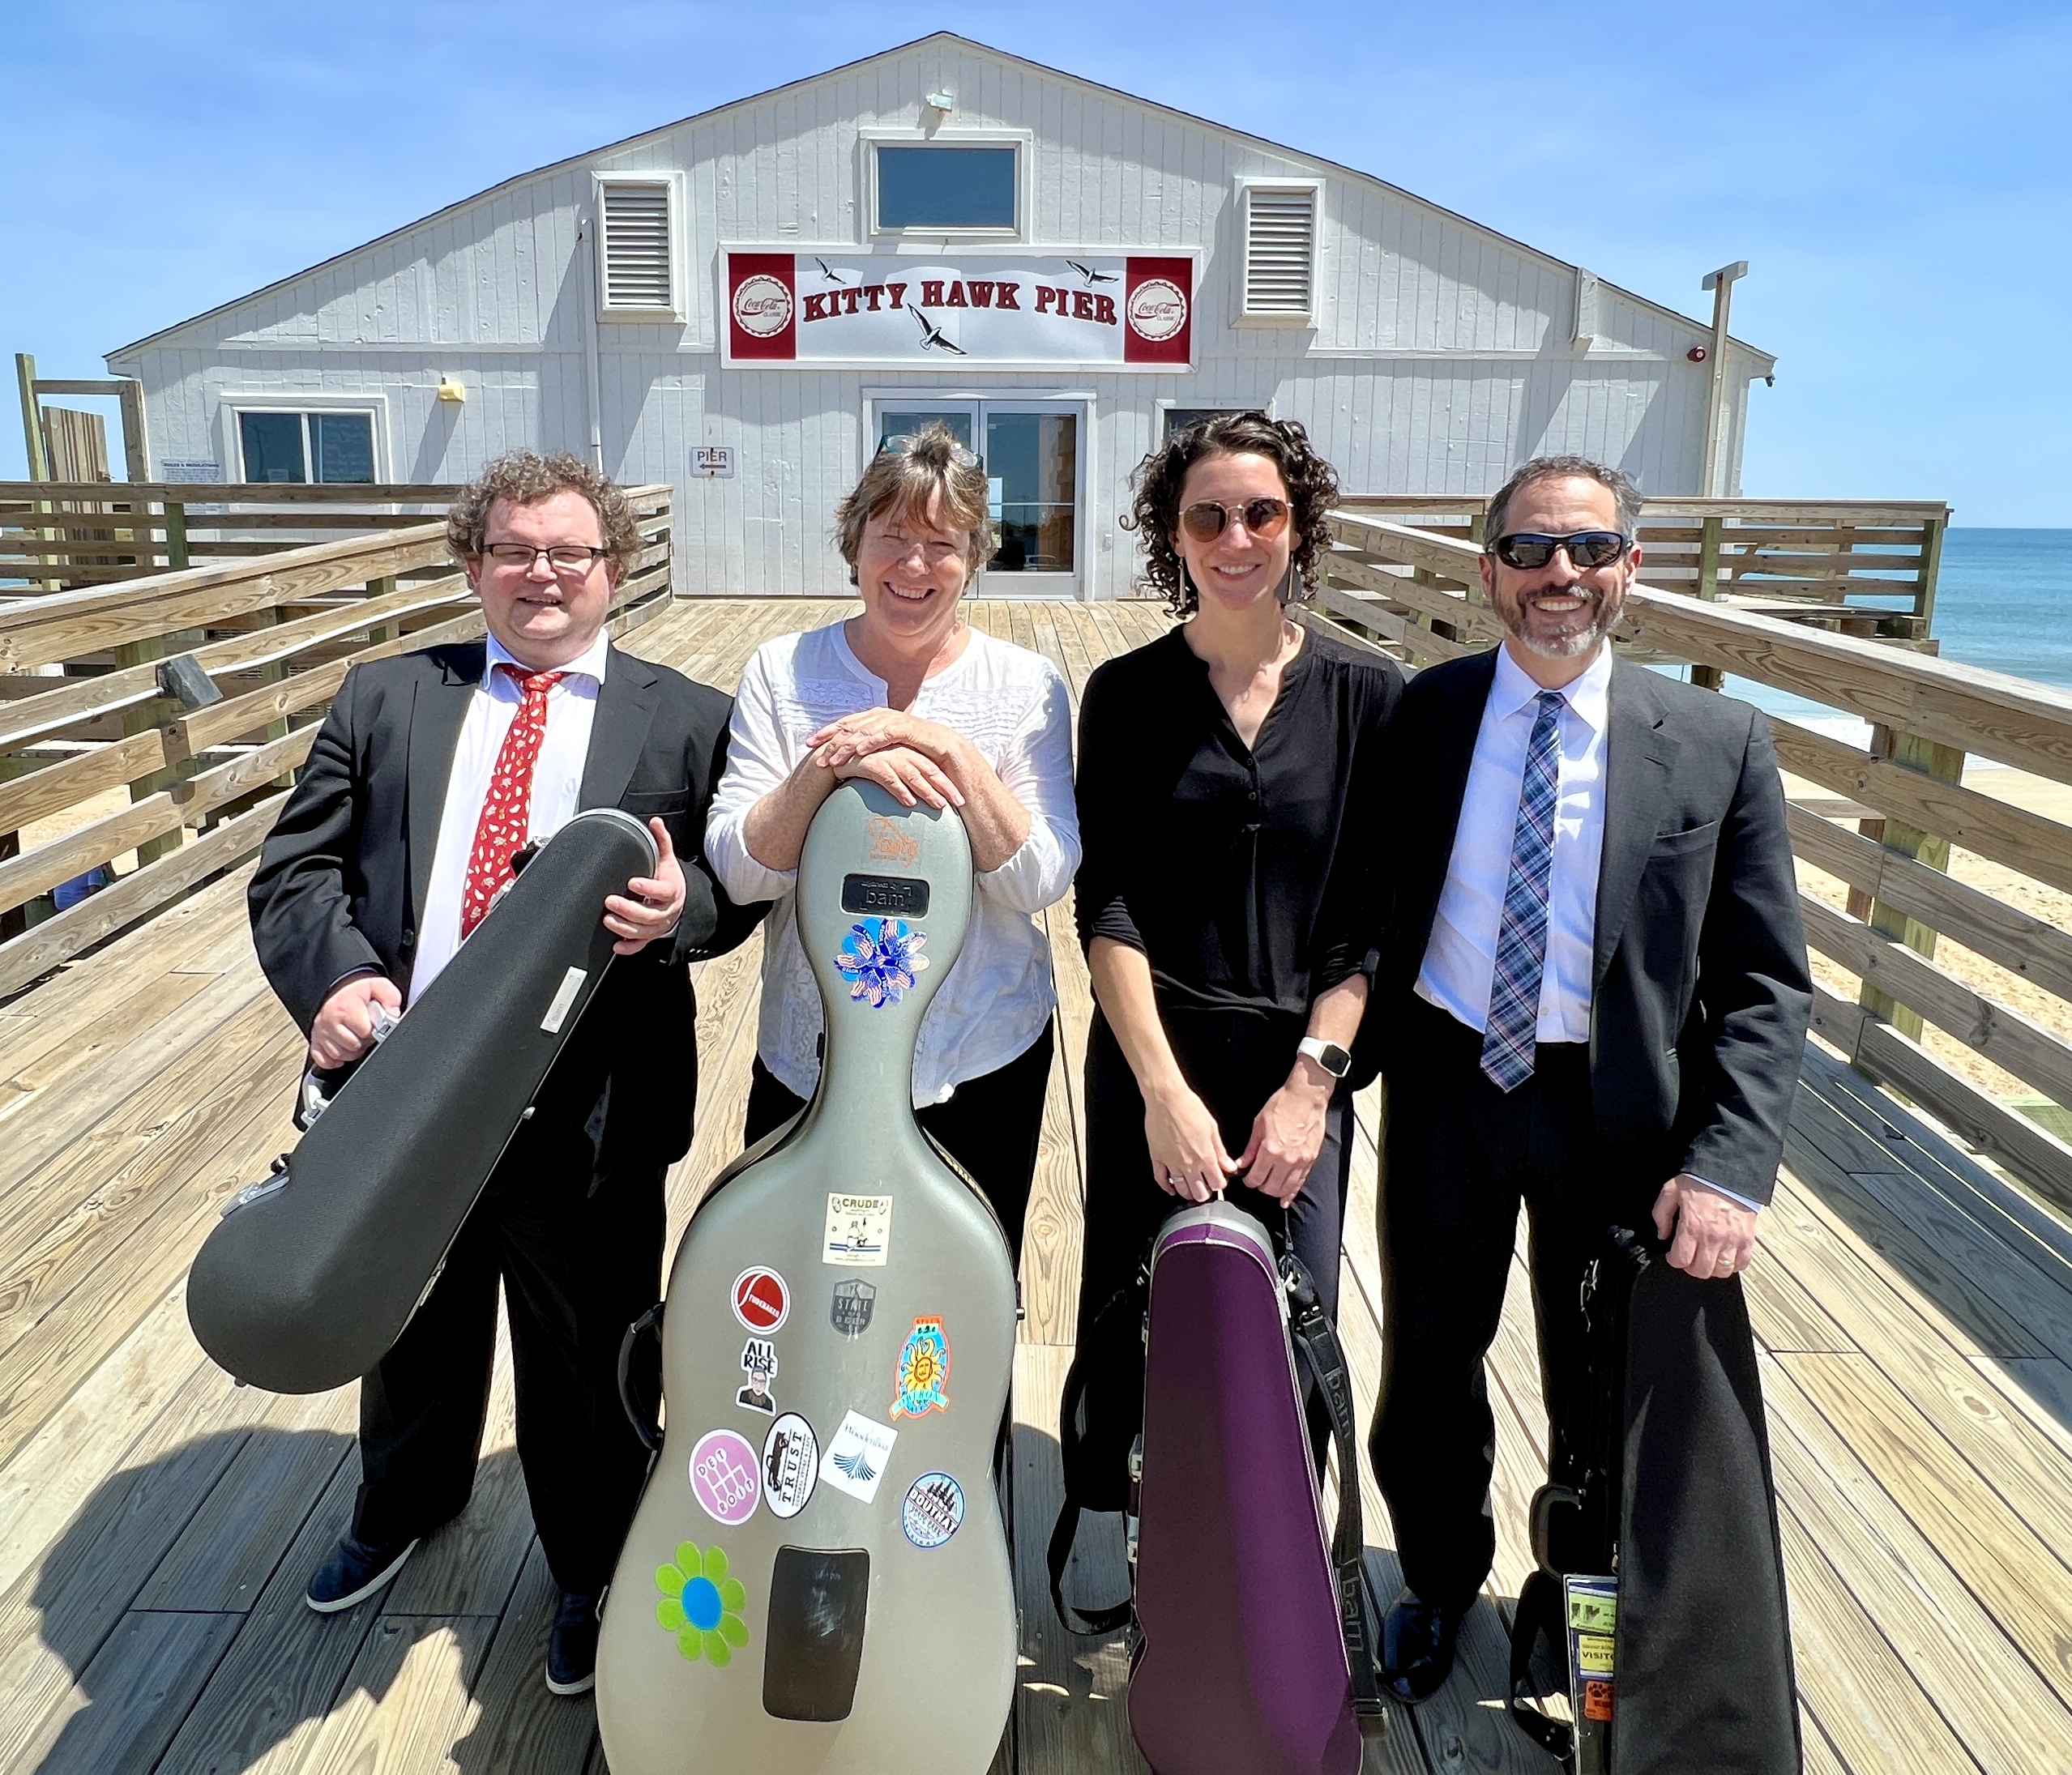 Free concert by N.C. Symphony String Quartet this Monday in Nags Head